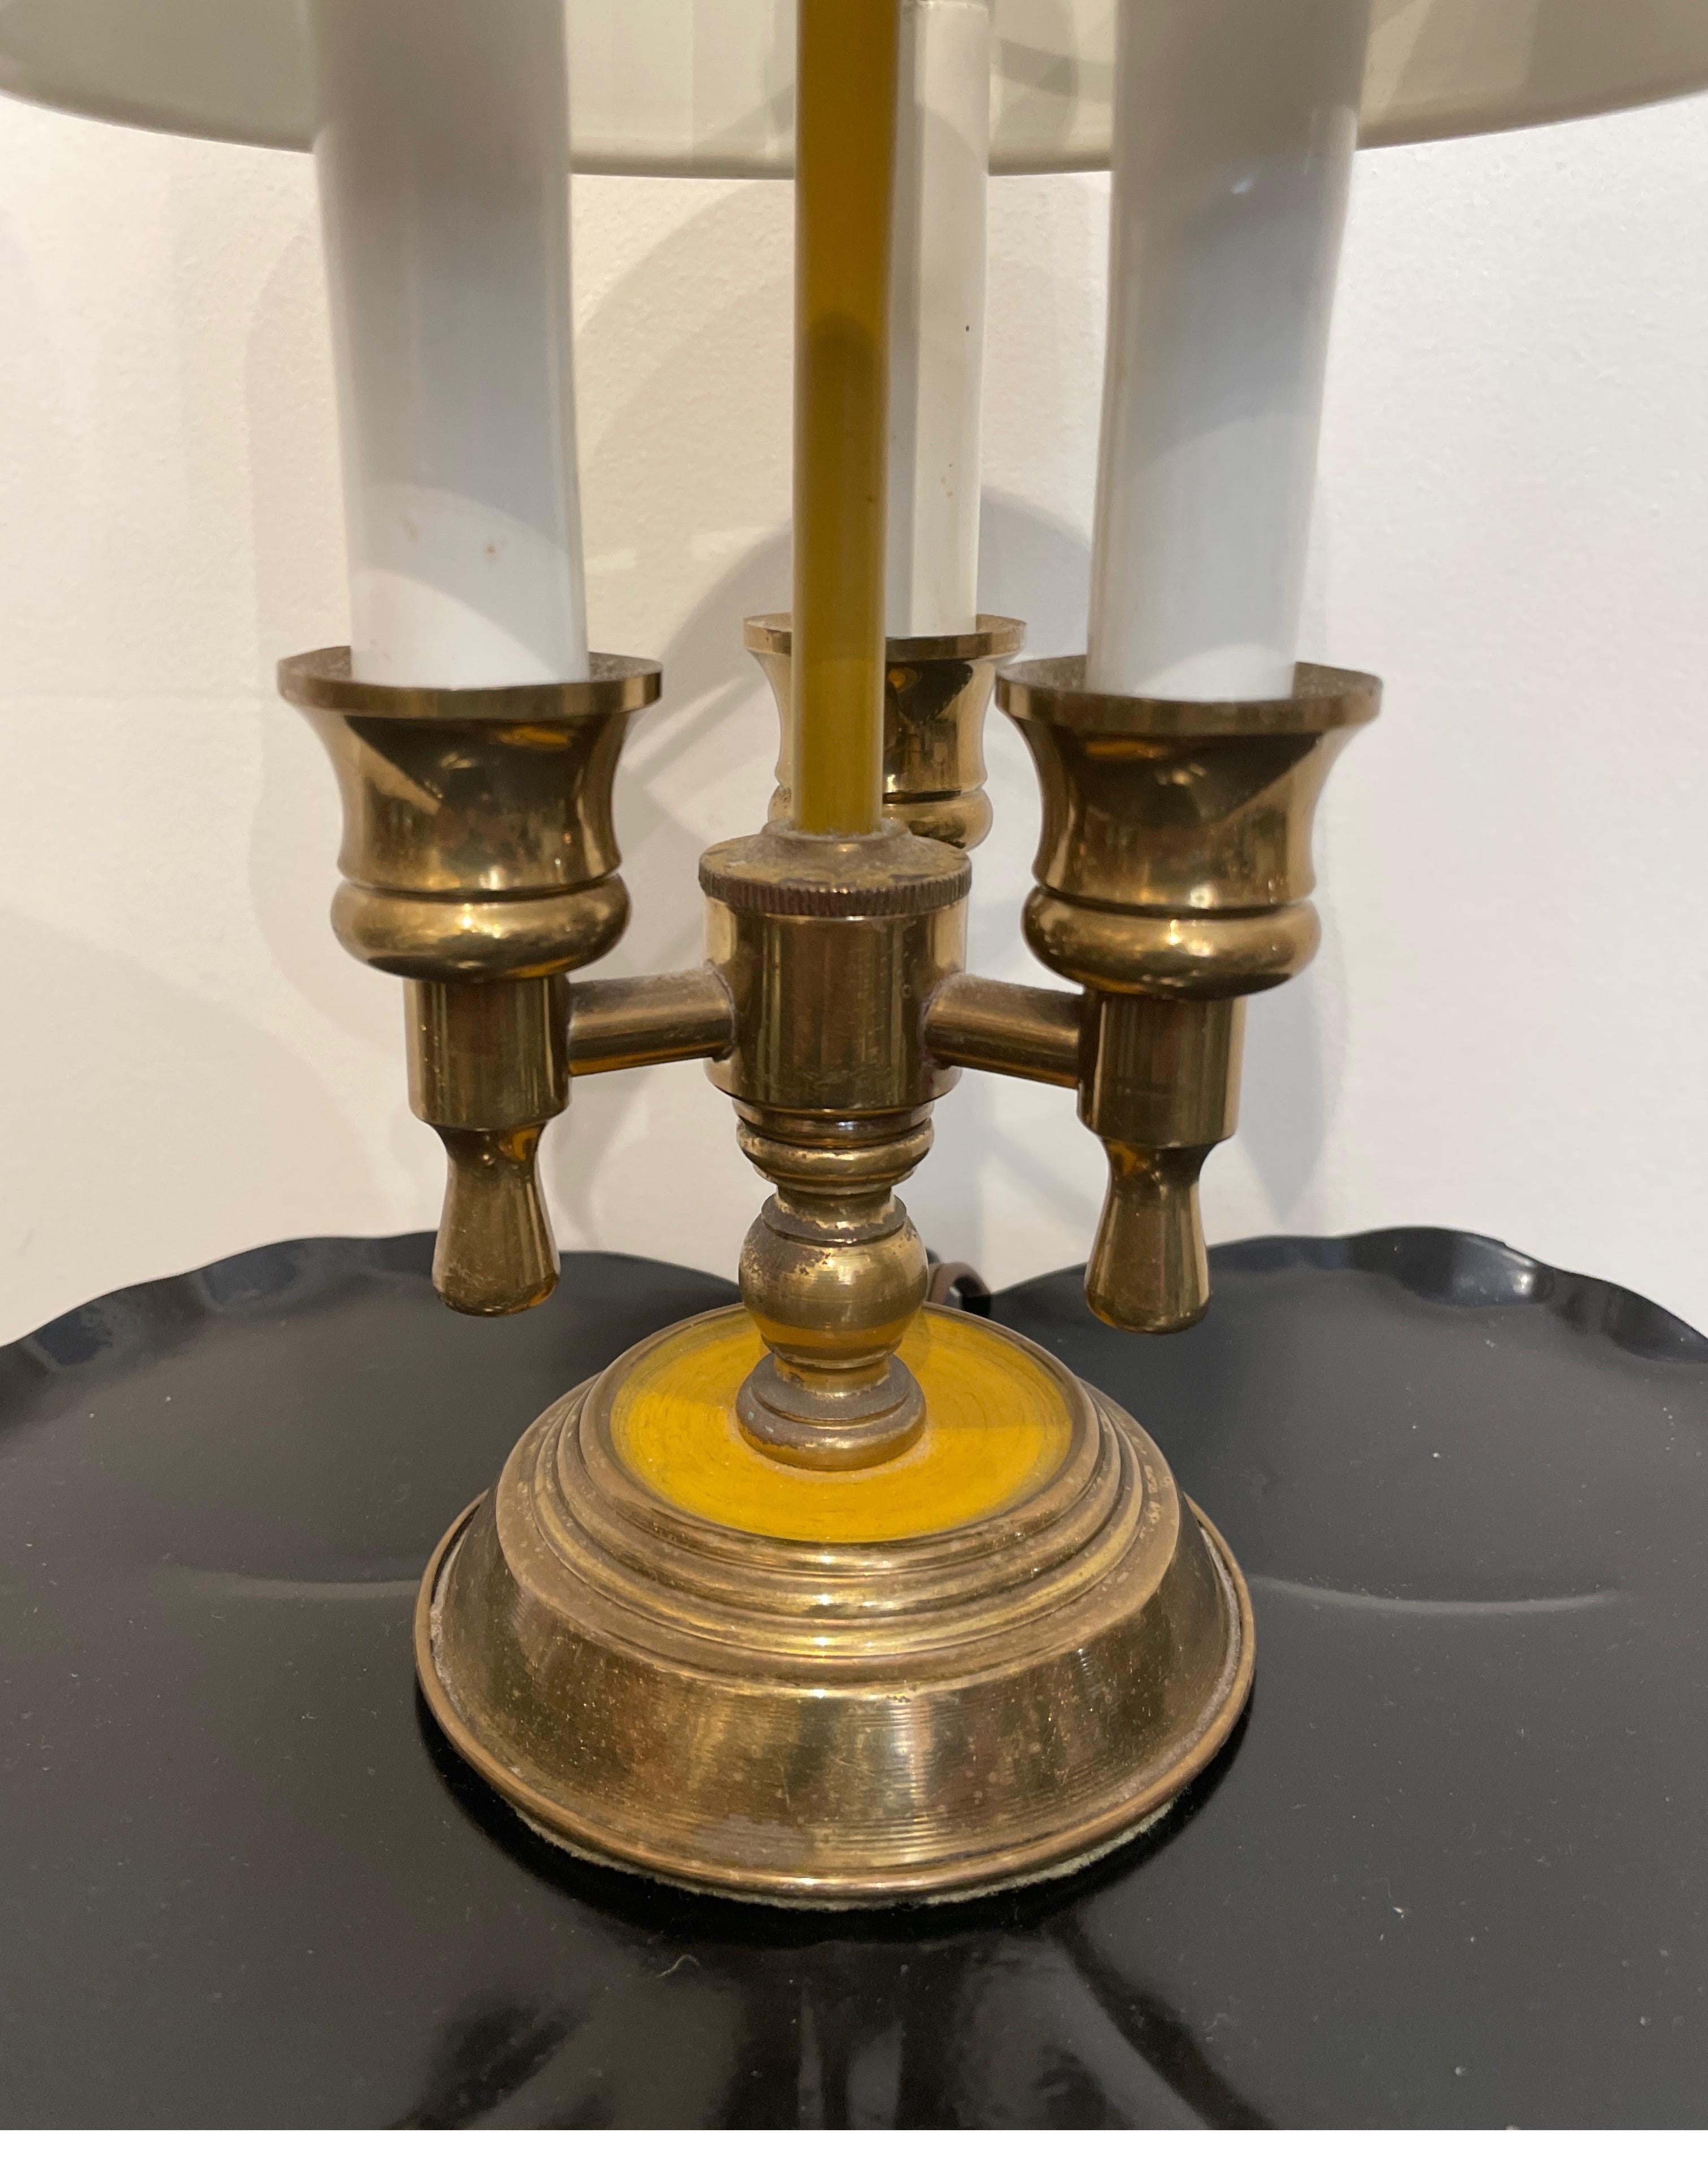 Very sweet petite brass bouillotte lamp with mustard tole shade. This charming lamp will make a great accessory in any setting.